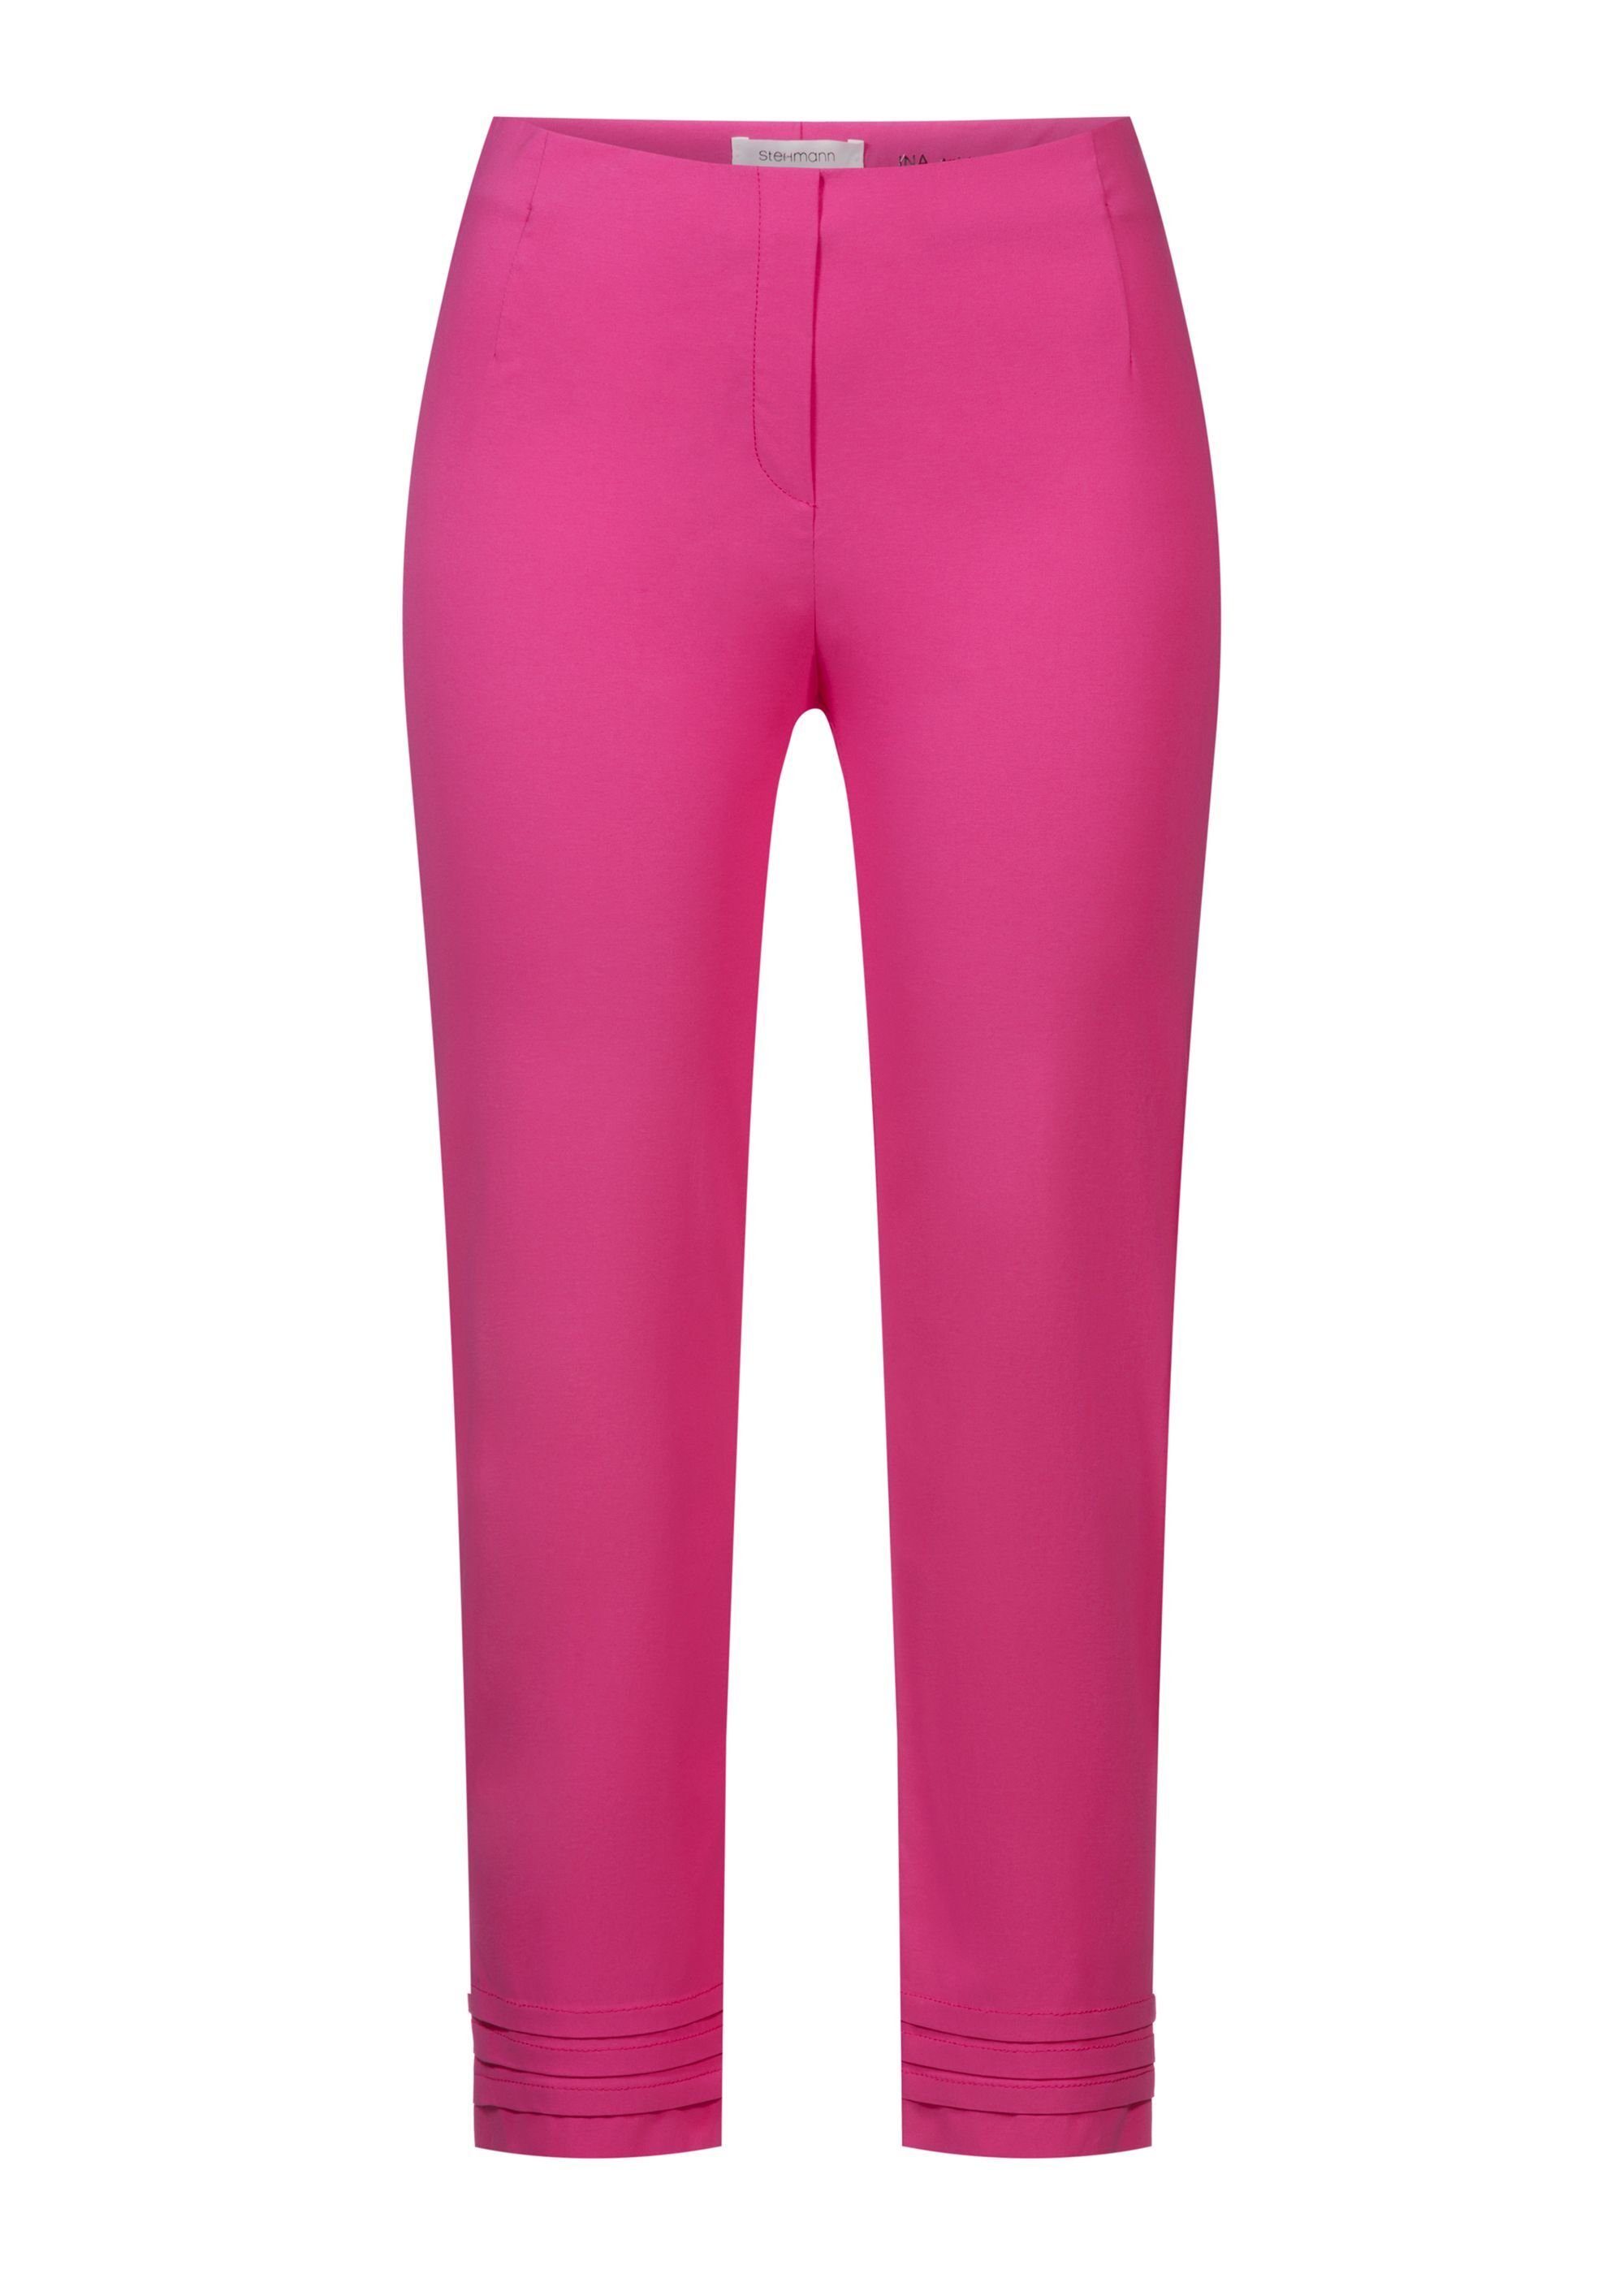 Stehmann Stoffhose Ina mit Faltendetails fuxia fluo